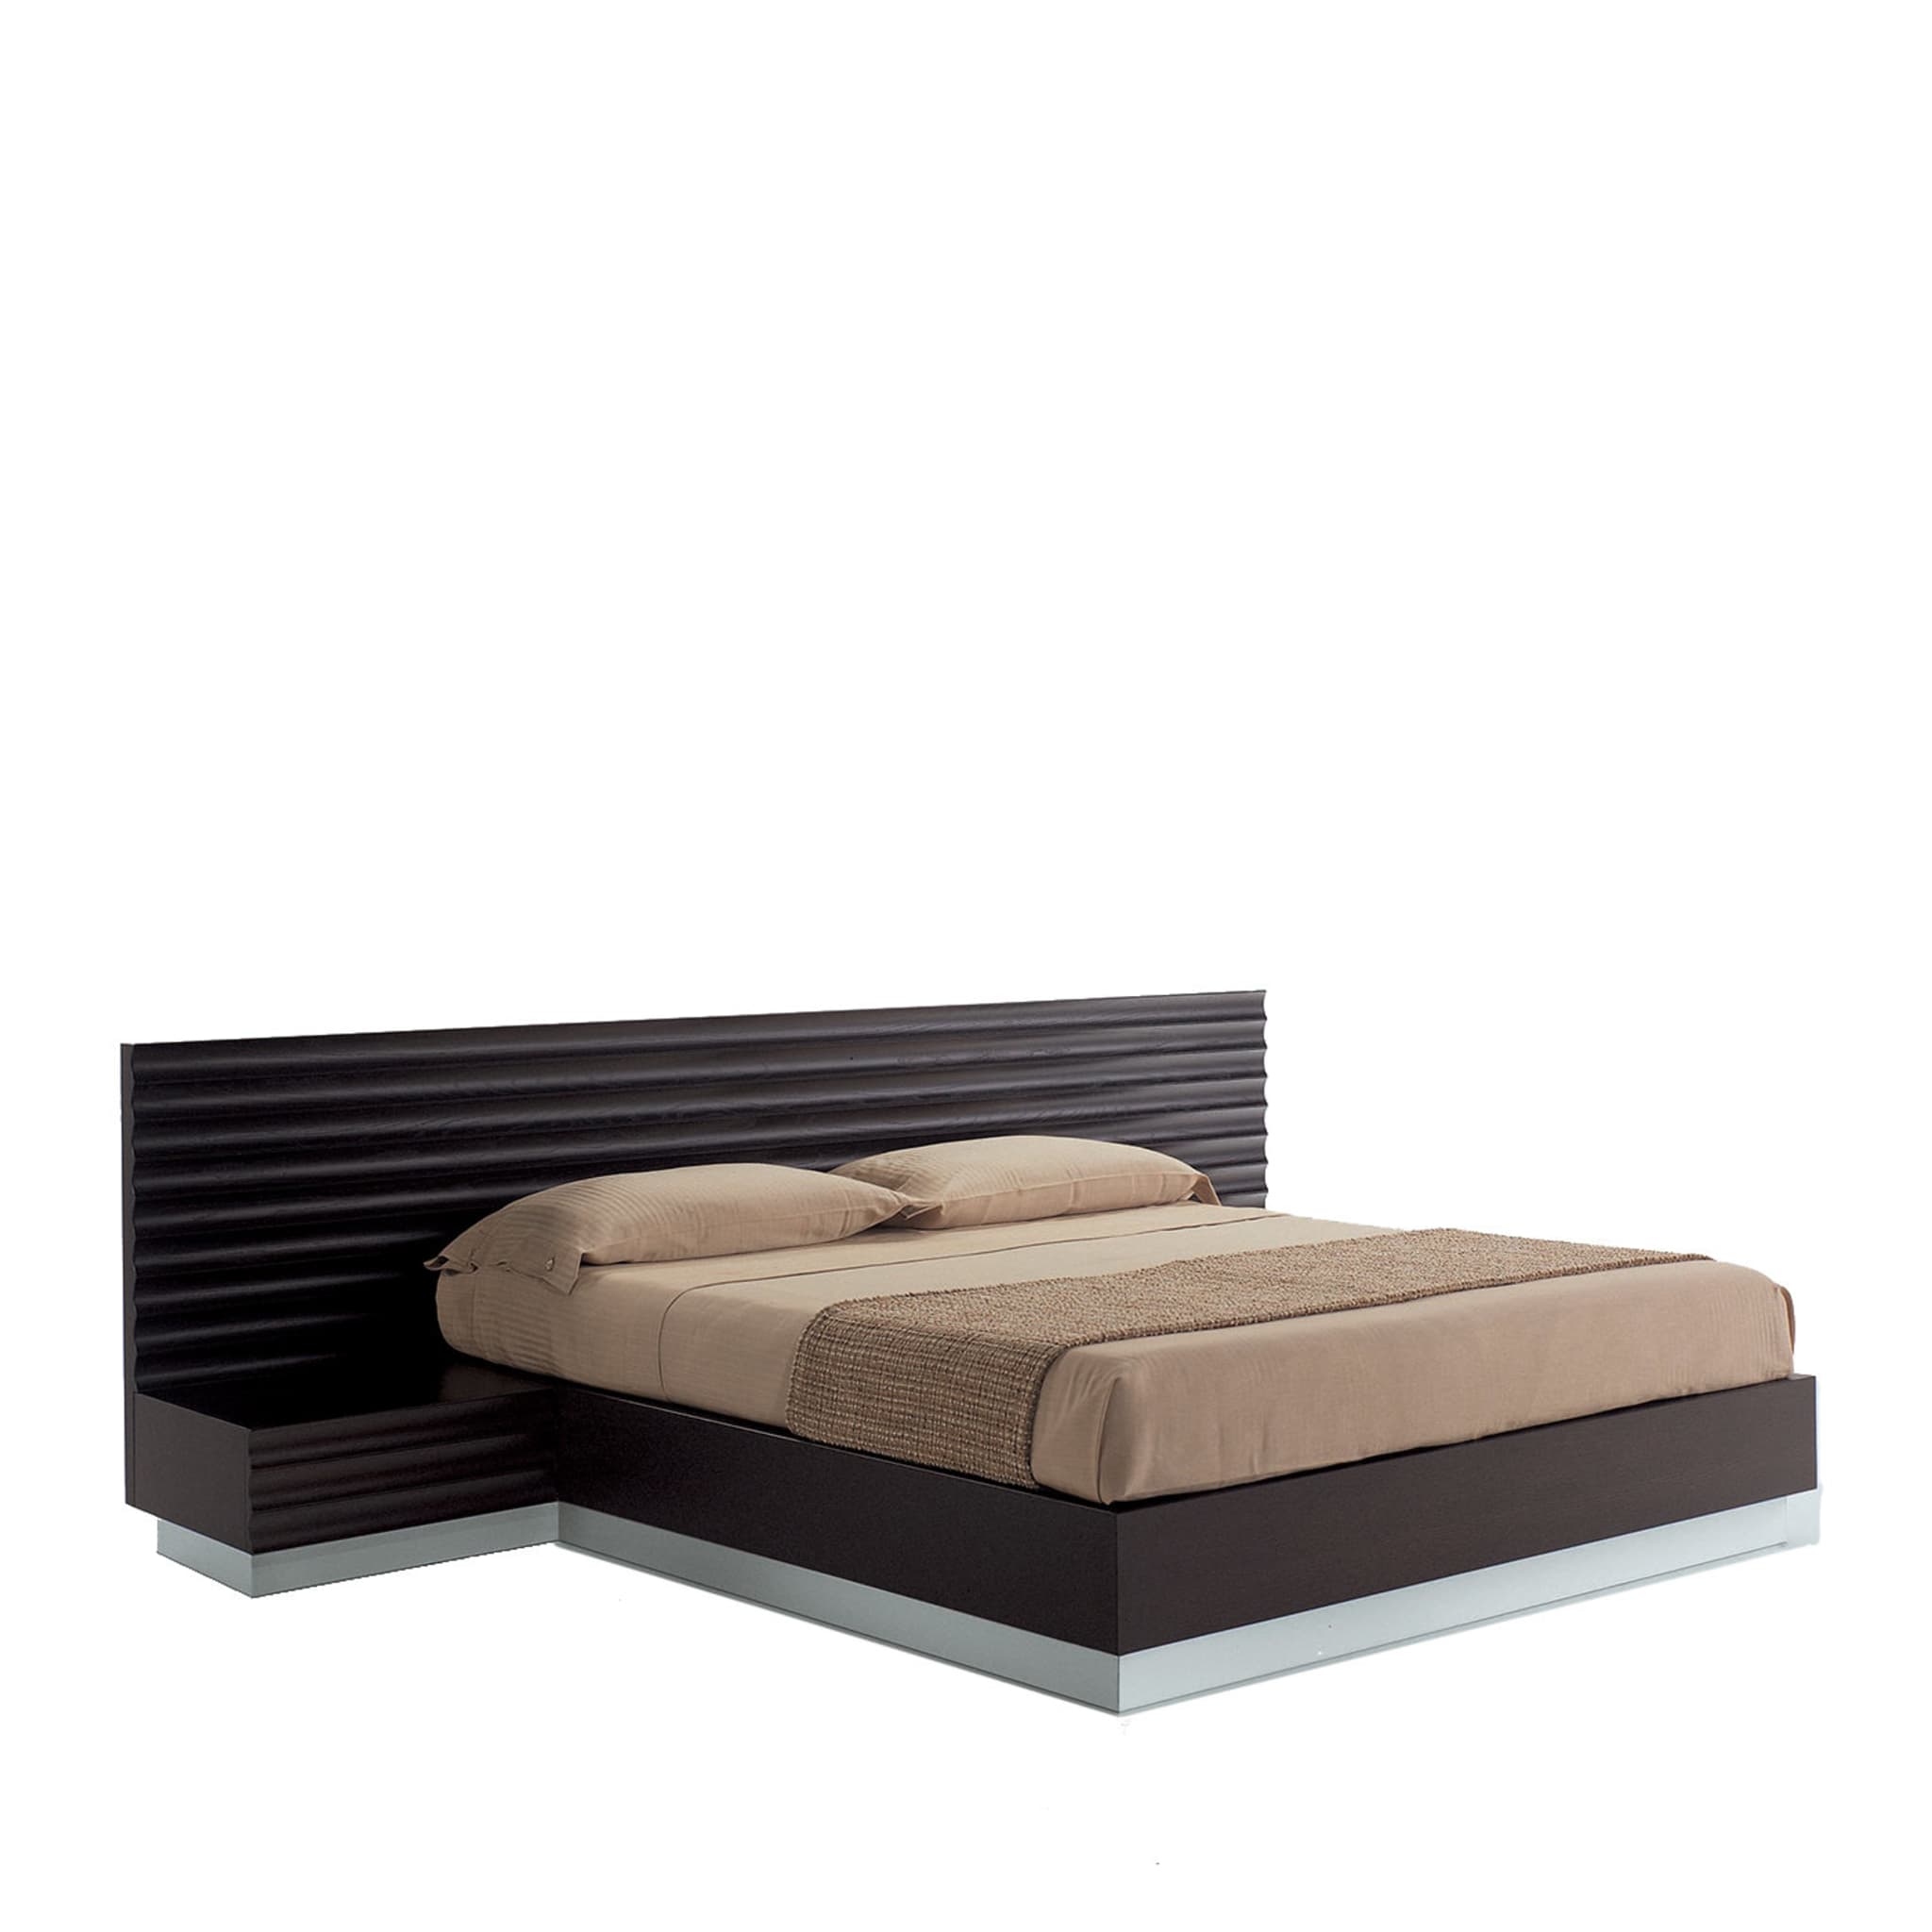 Jaco Bed Frame with Nightstands - Main view